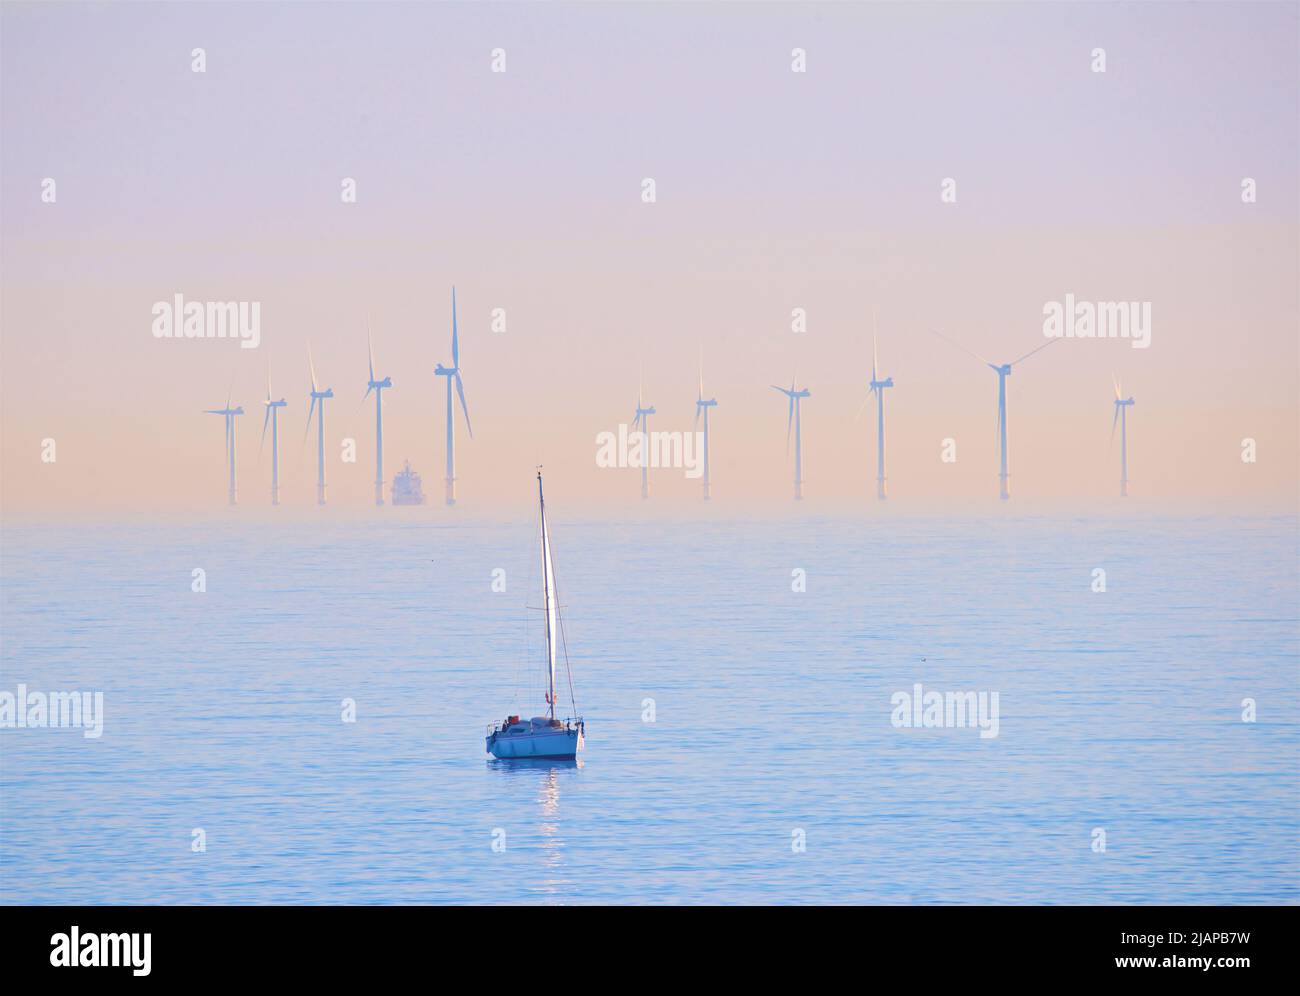 Turbines of the Rampion offshore windfarm located off the coast of Sussex, England, UK. Commissioned and produccing renewable energy in 2018, the 116 turbine windfarm cost £1.3 to build. Yacht in the foreground. Stock Photo